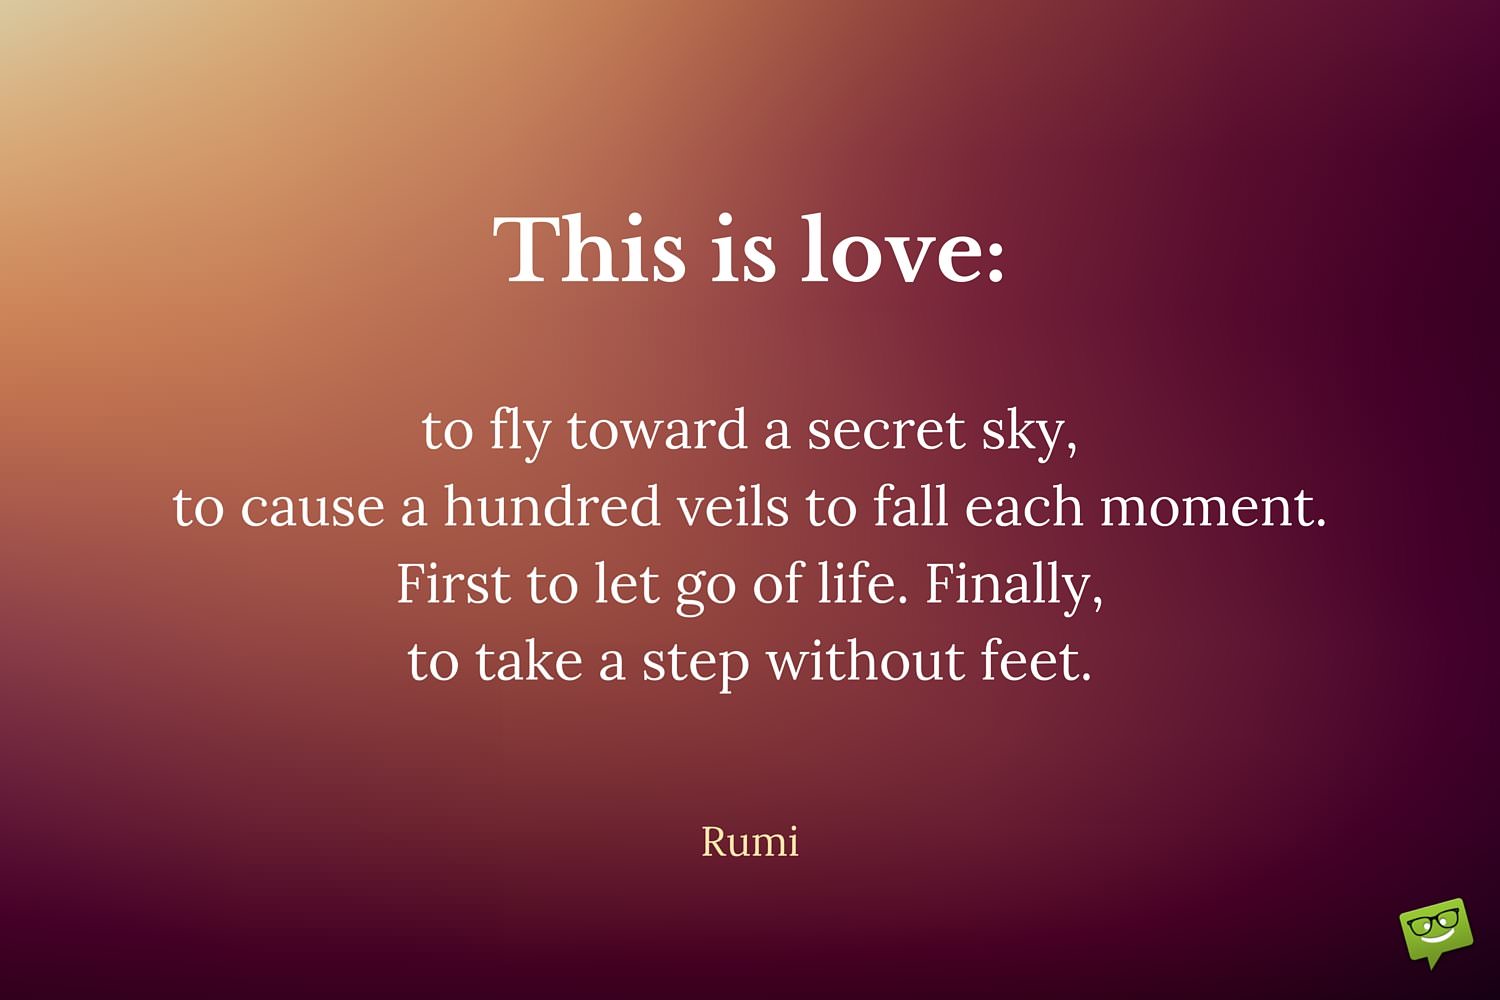 This Is Love To Fly Toward A Secret Sky To Cause A Hundred Veils To Fall Each Moment. First To Let Go Of Life. Finally To Take A Step Without Feet. Rumi Quote About Love 